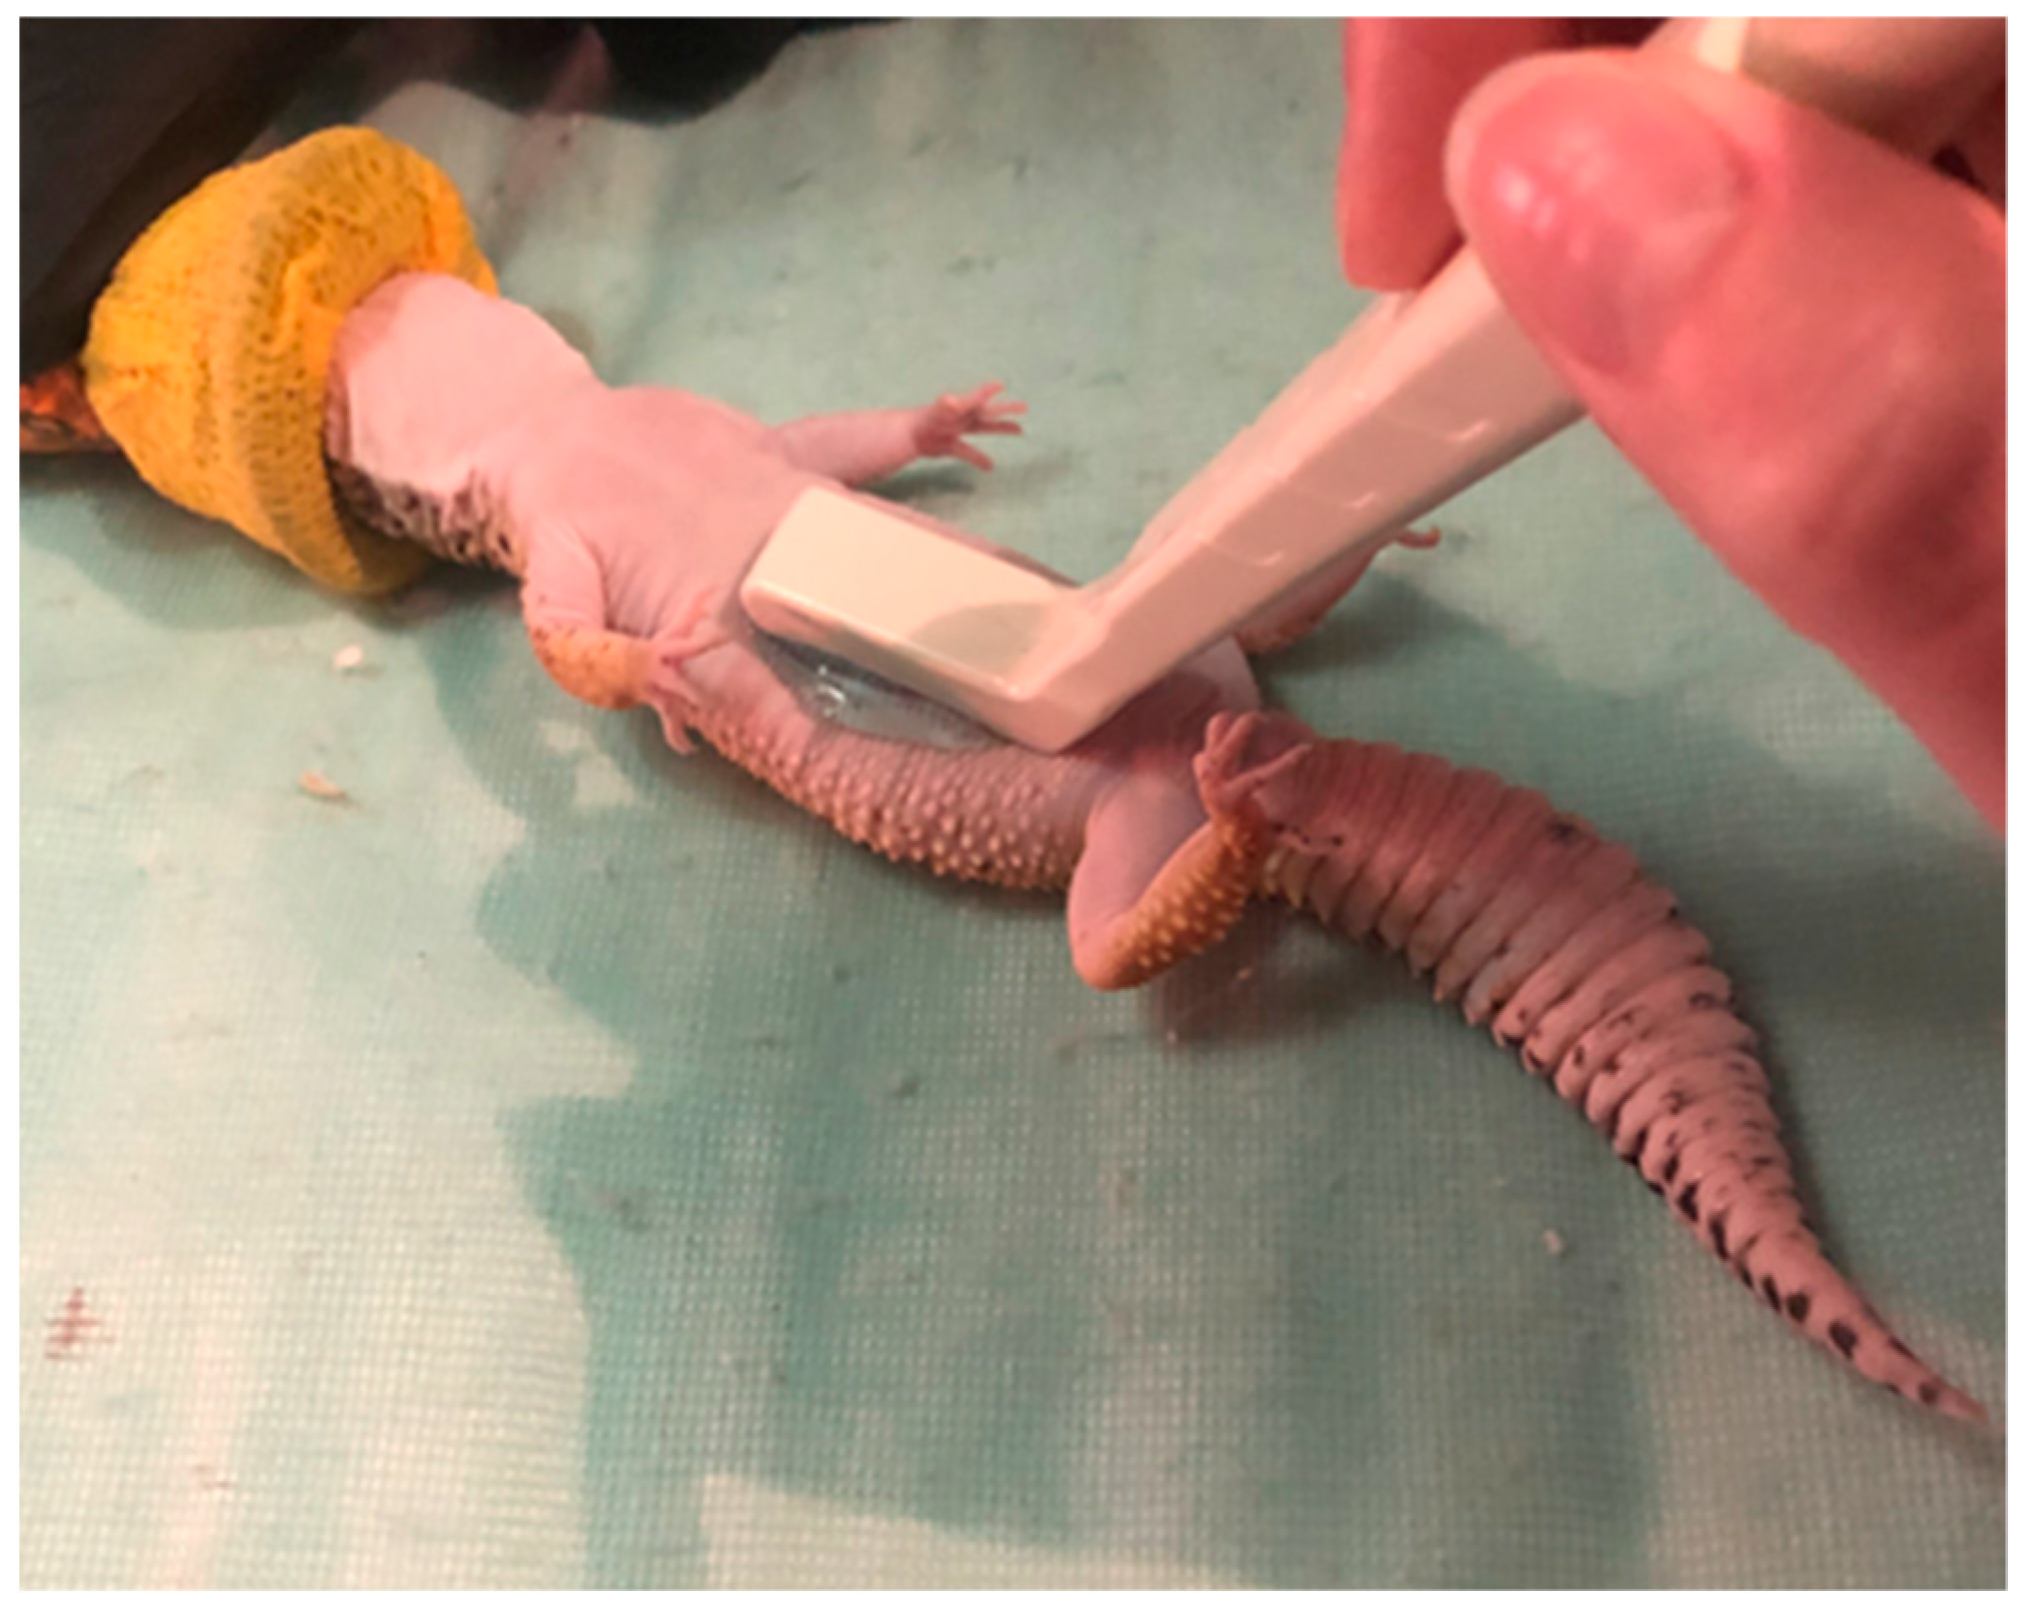 Animals Free Full-Text Determining the Effects of Serial Injections of Pregnant Mare Serum Gonadotropin on Plasma Testosterone Concentrations, Testicular Dynamics, and Semen Production in Leopard Geckos (Eublepharis macularius)